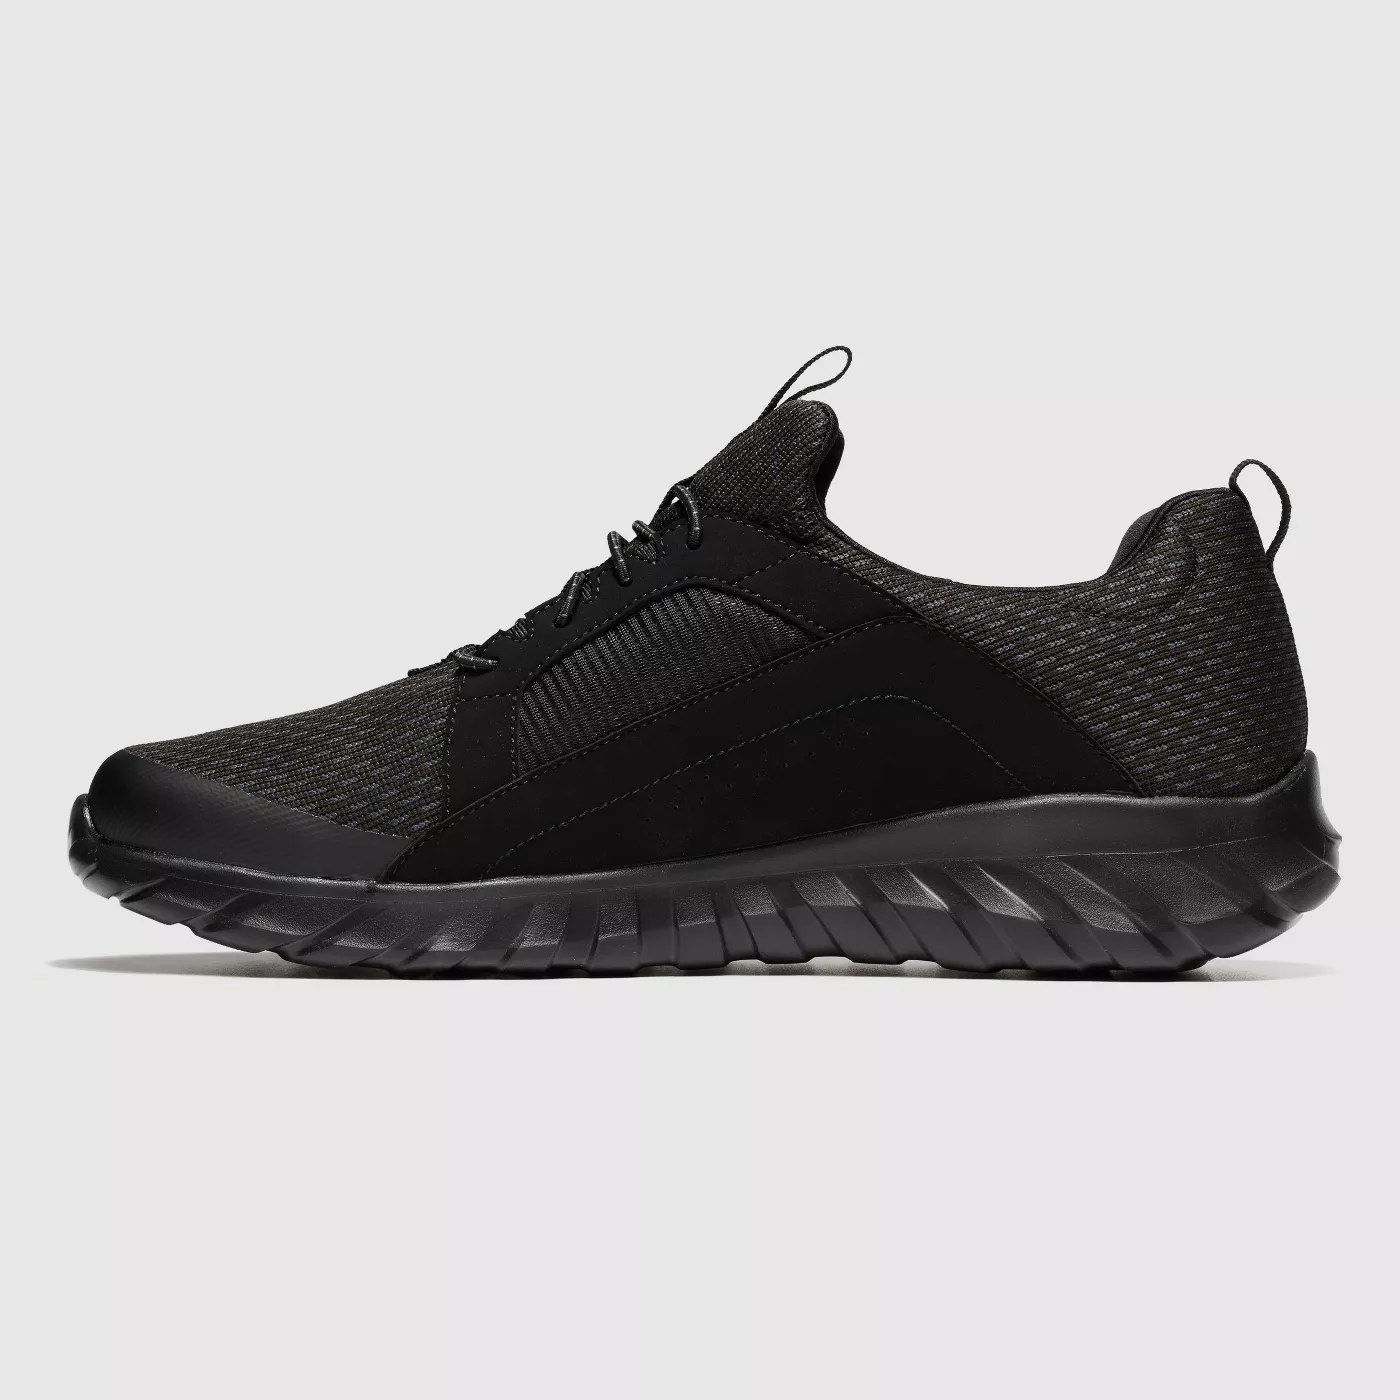 A workout shoe in all black